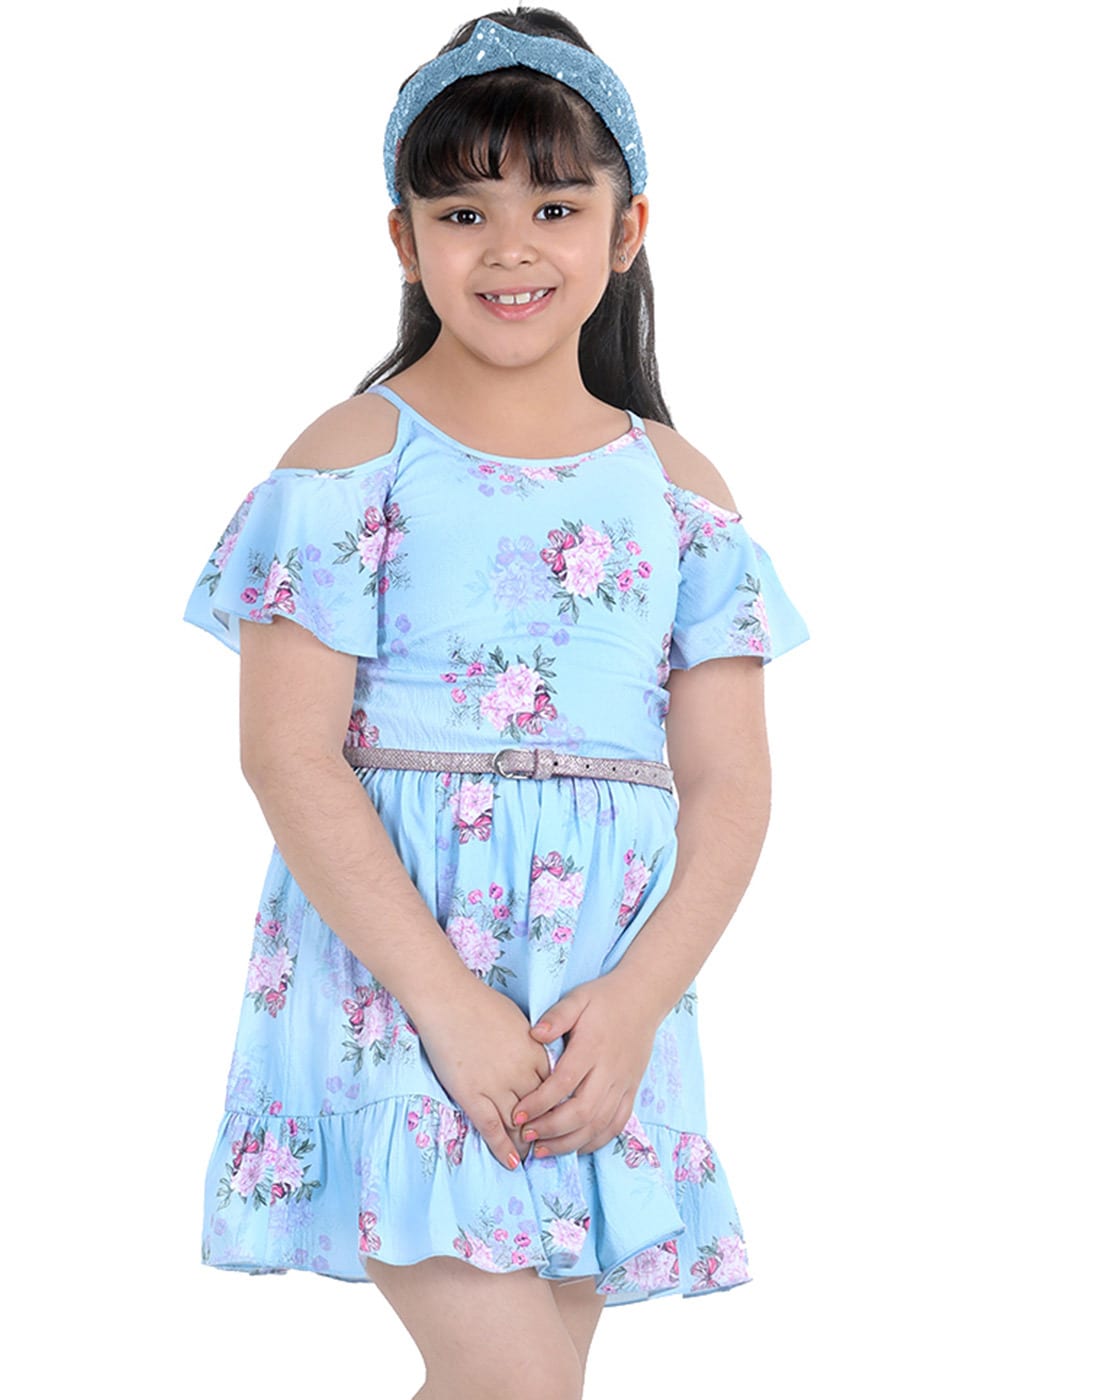 Ripening Girls' First Birthday Dresses Satin Multicolor Knee Length  Princess Dress for Kids_8-9Years : Amazon.in: Fashion